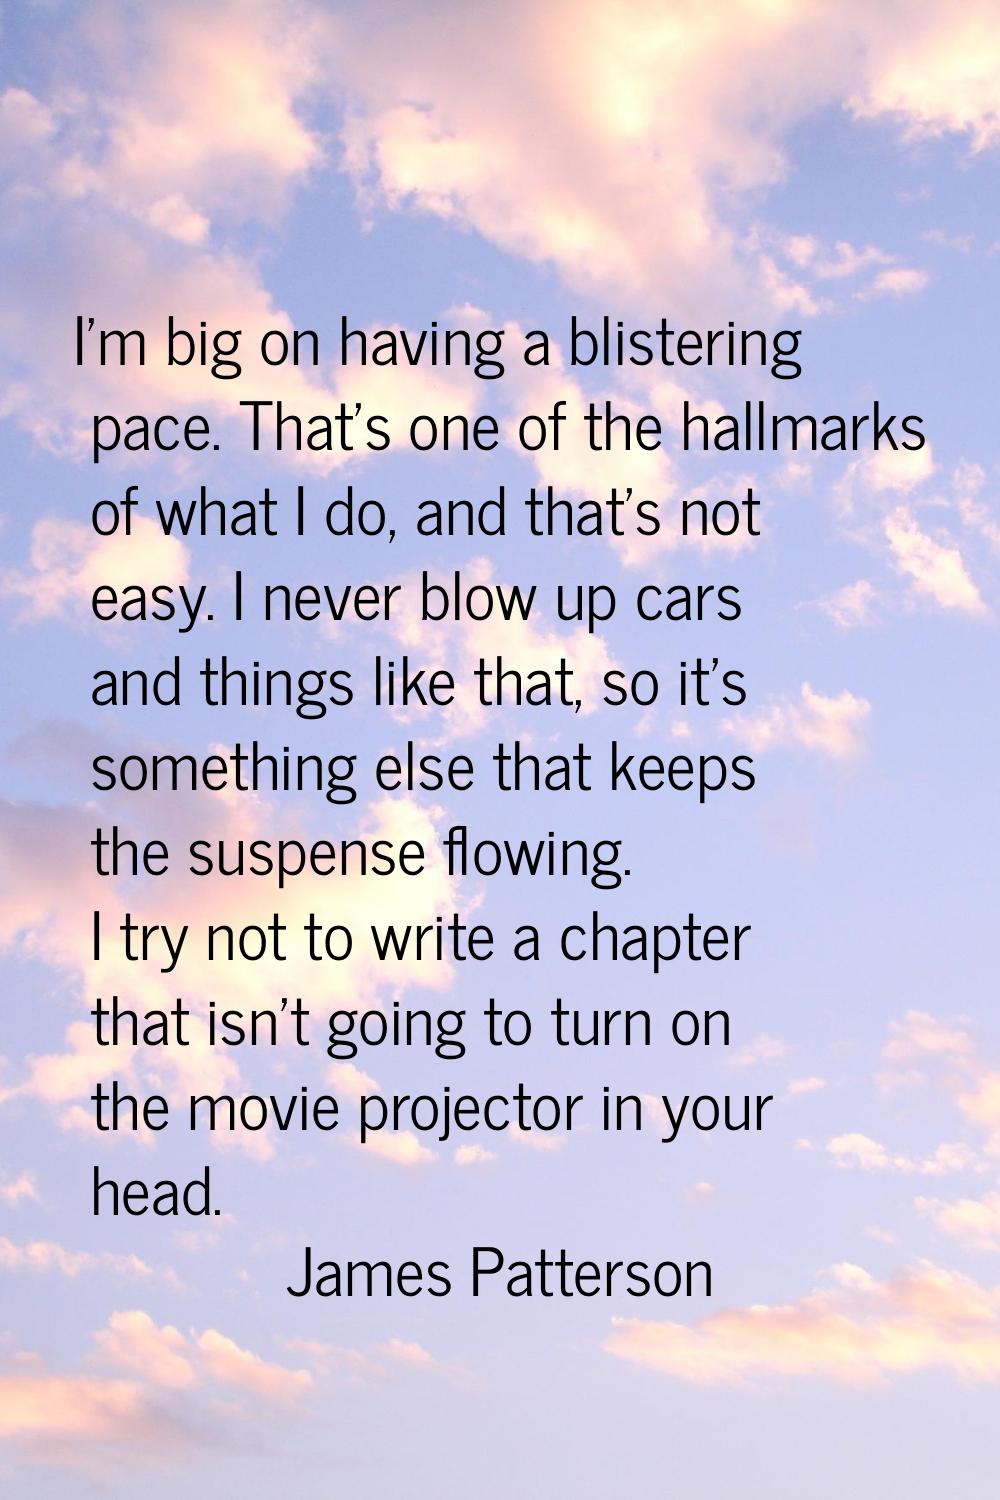 I'm big on having a blistering pace. That's one of the hallmarks of what I do, and that's not easy.